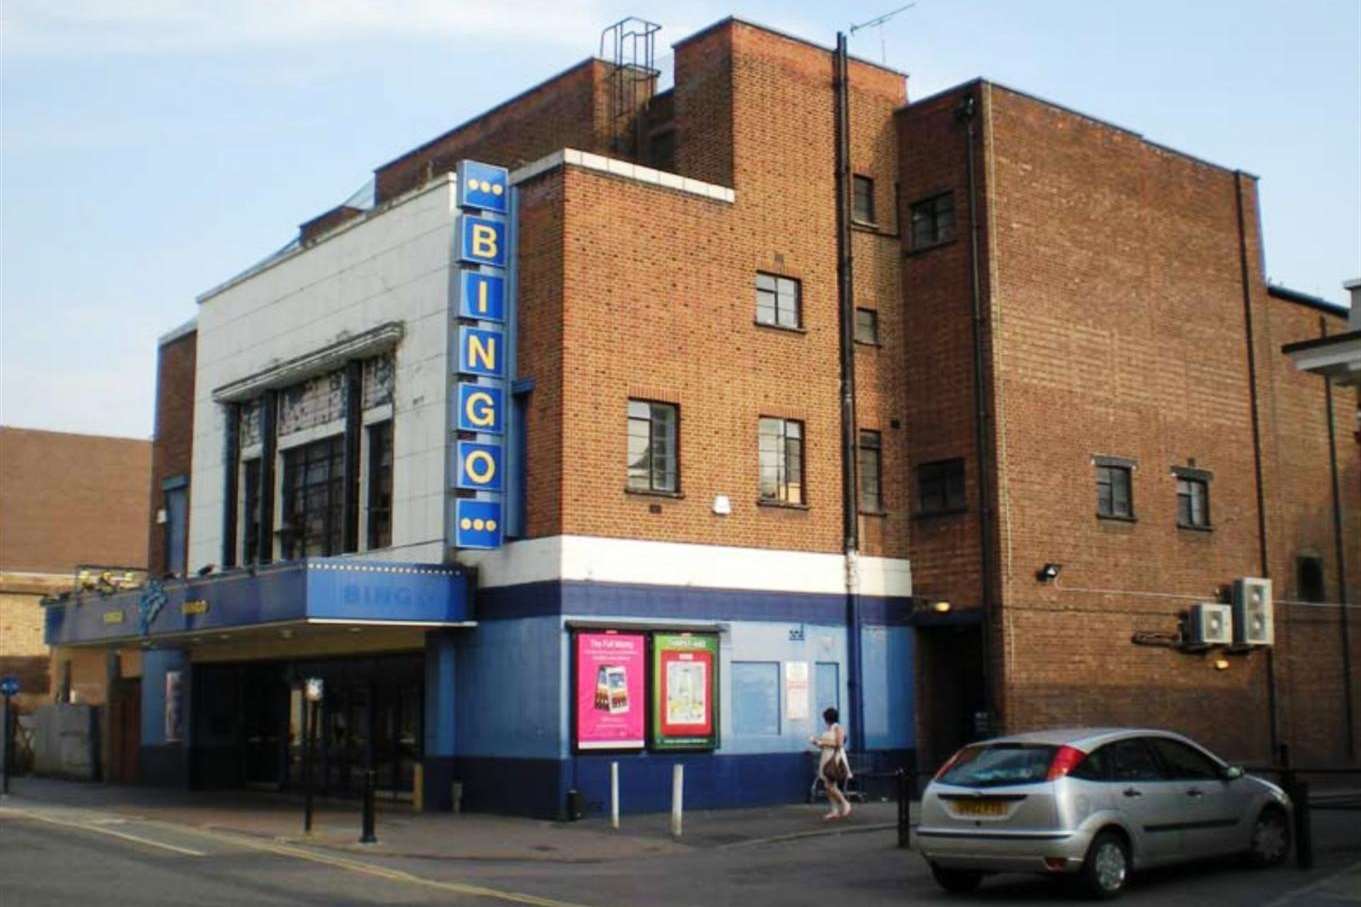 The Gala Bingo site in Dartford has been put up for sale - and is being marketed by a company which specialises in churches and places of worship.